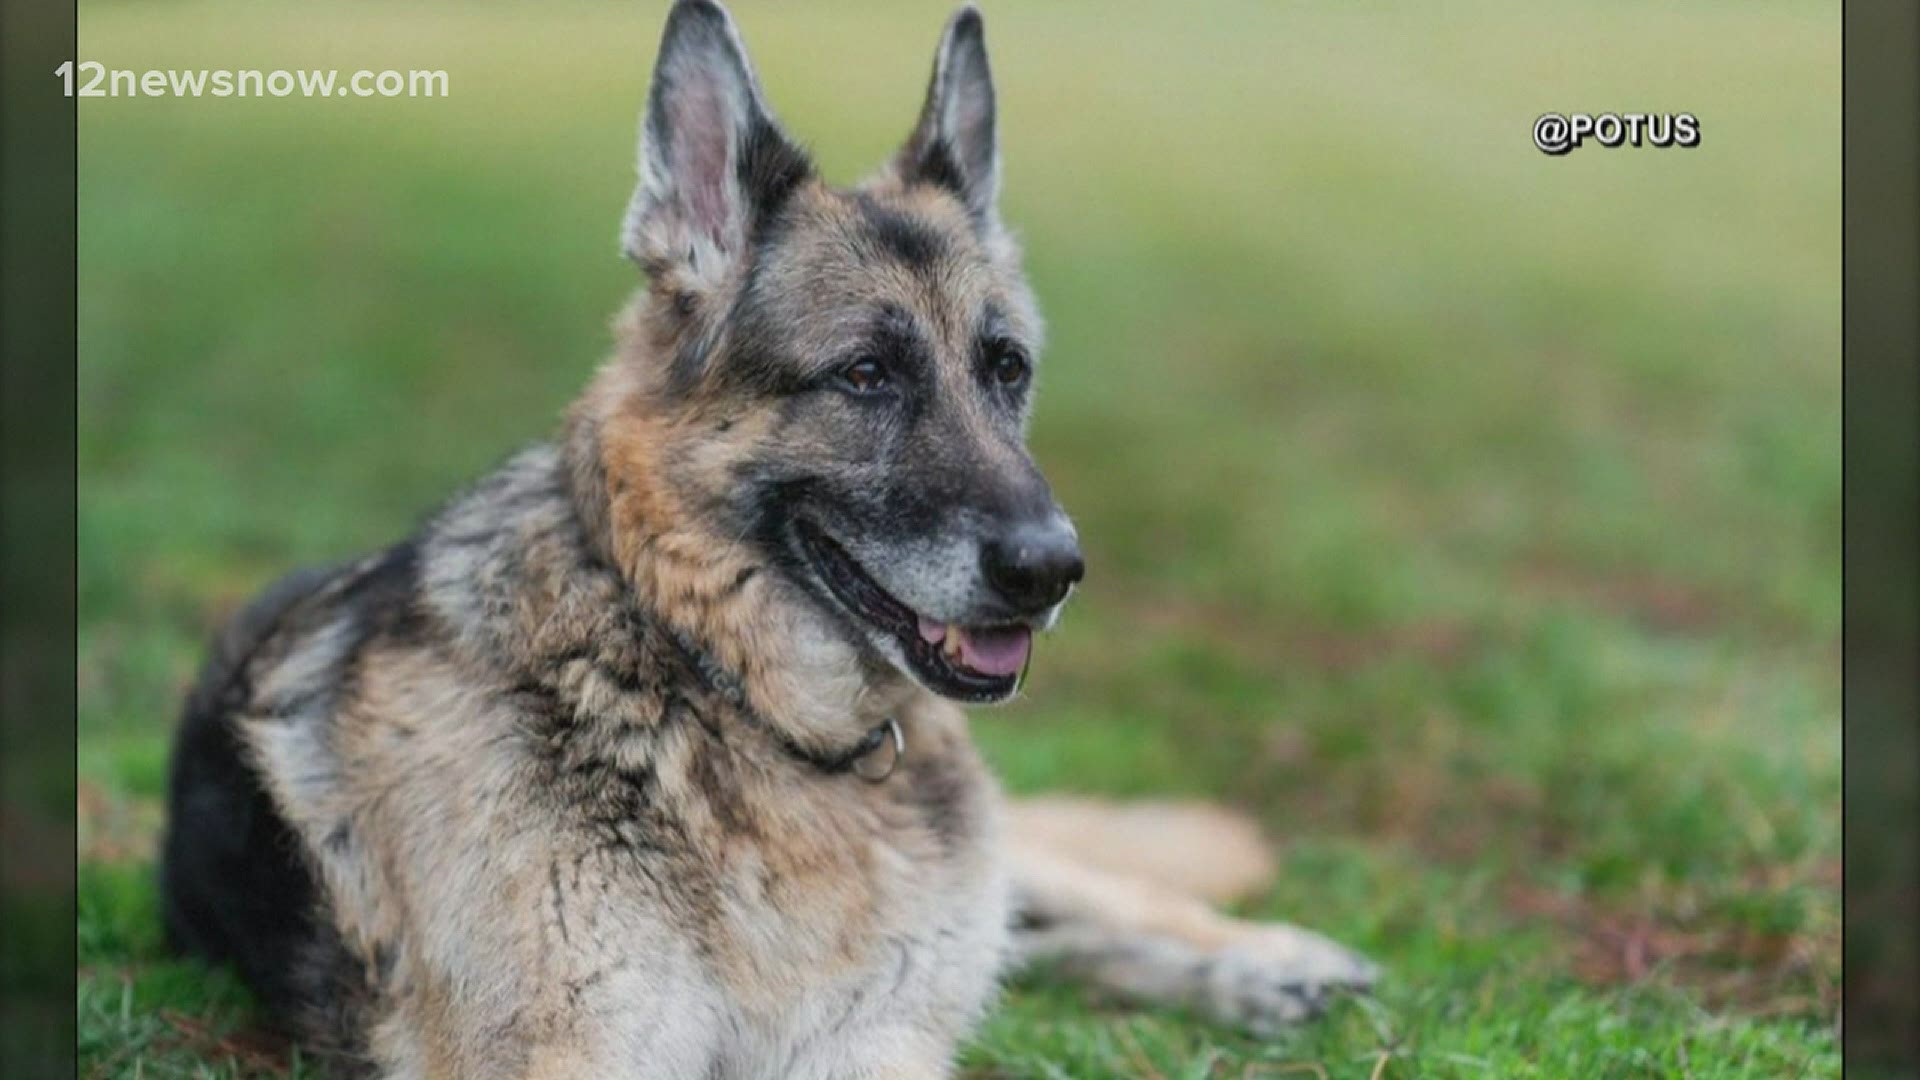 13-year-old Champ died peacefully in his home.